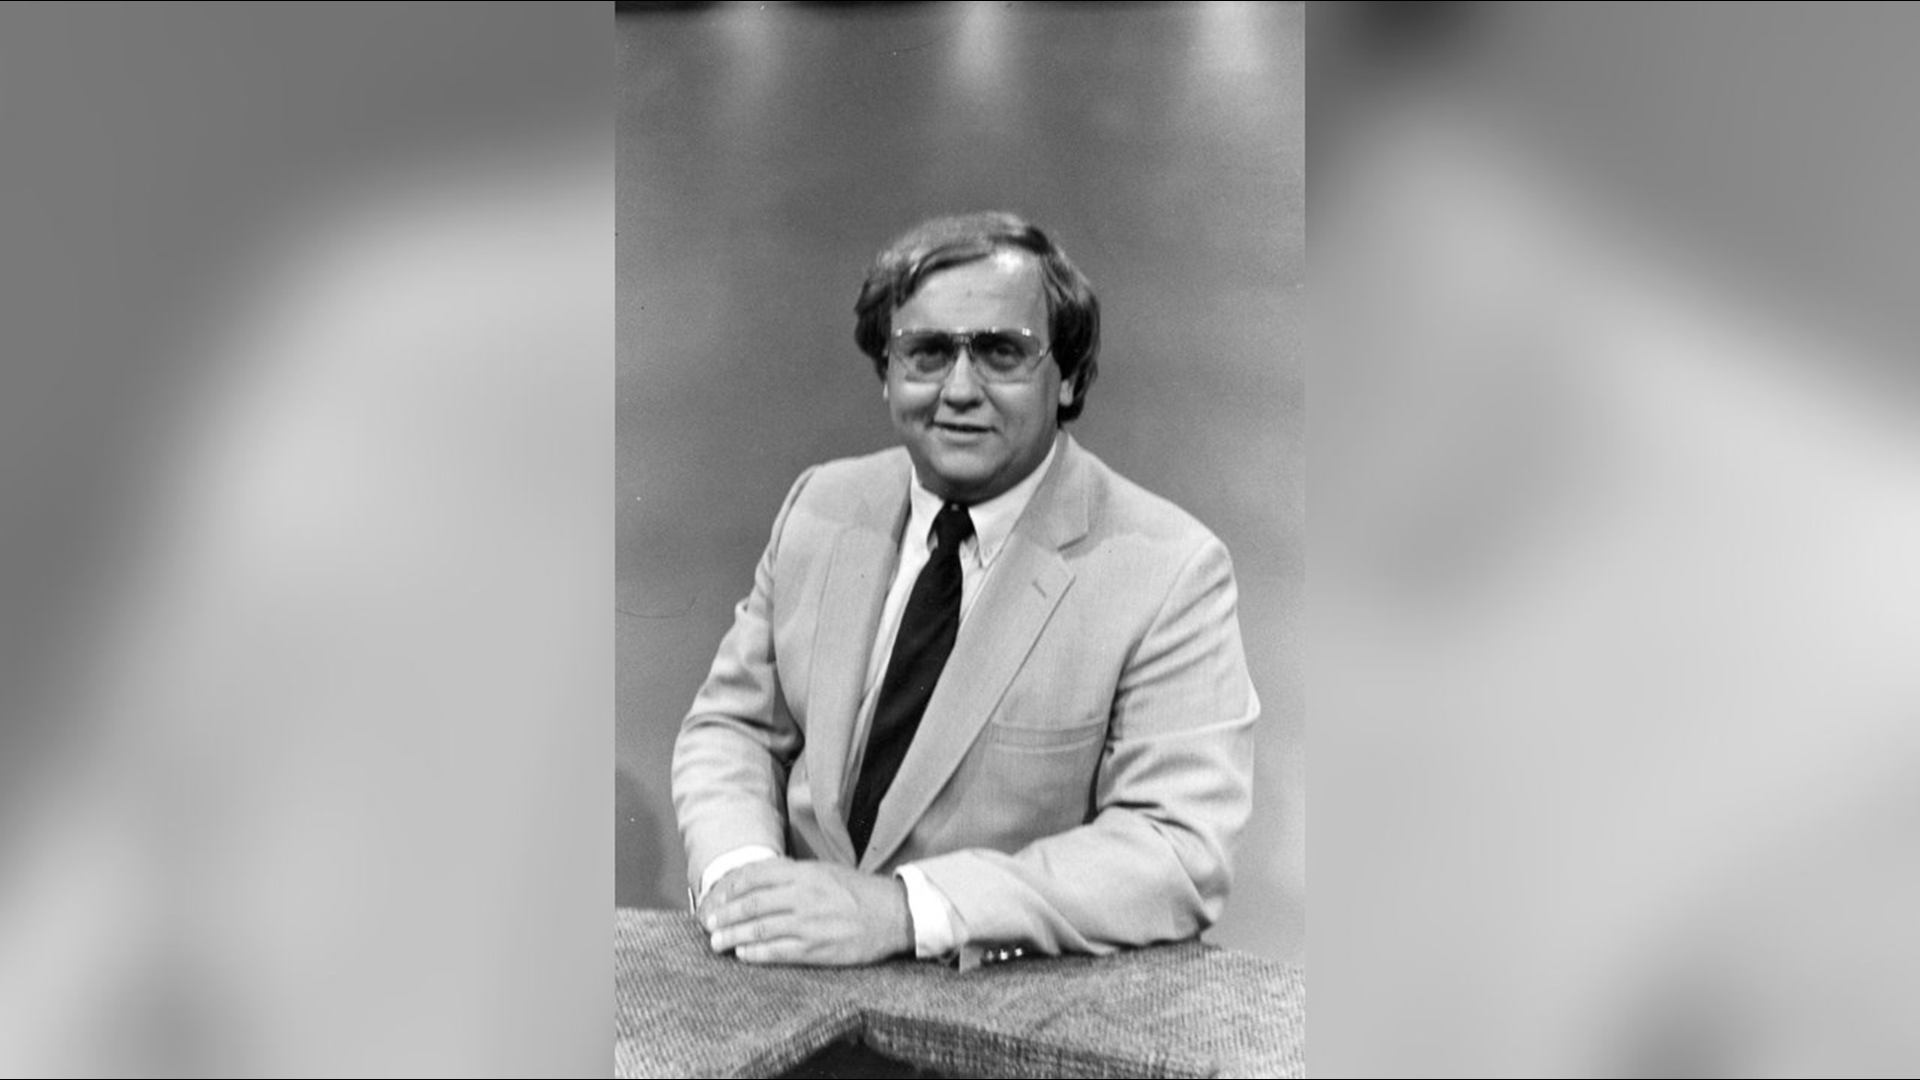 Former KCEN anchor, weatherman, and news director, Tony Hennes' visitation is taking place at the Harper-Talasek Funeral Home in Temple on Wednesday from 5 p.m. - 8 p.m.